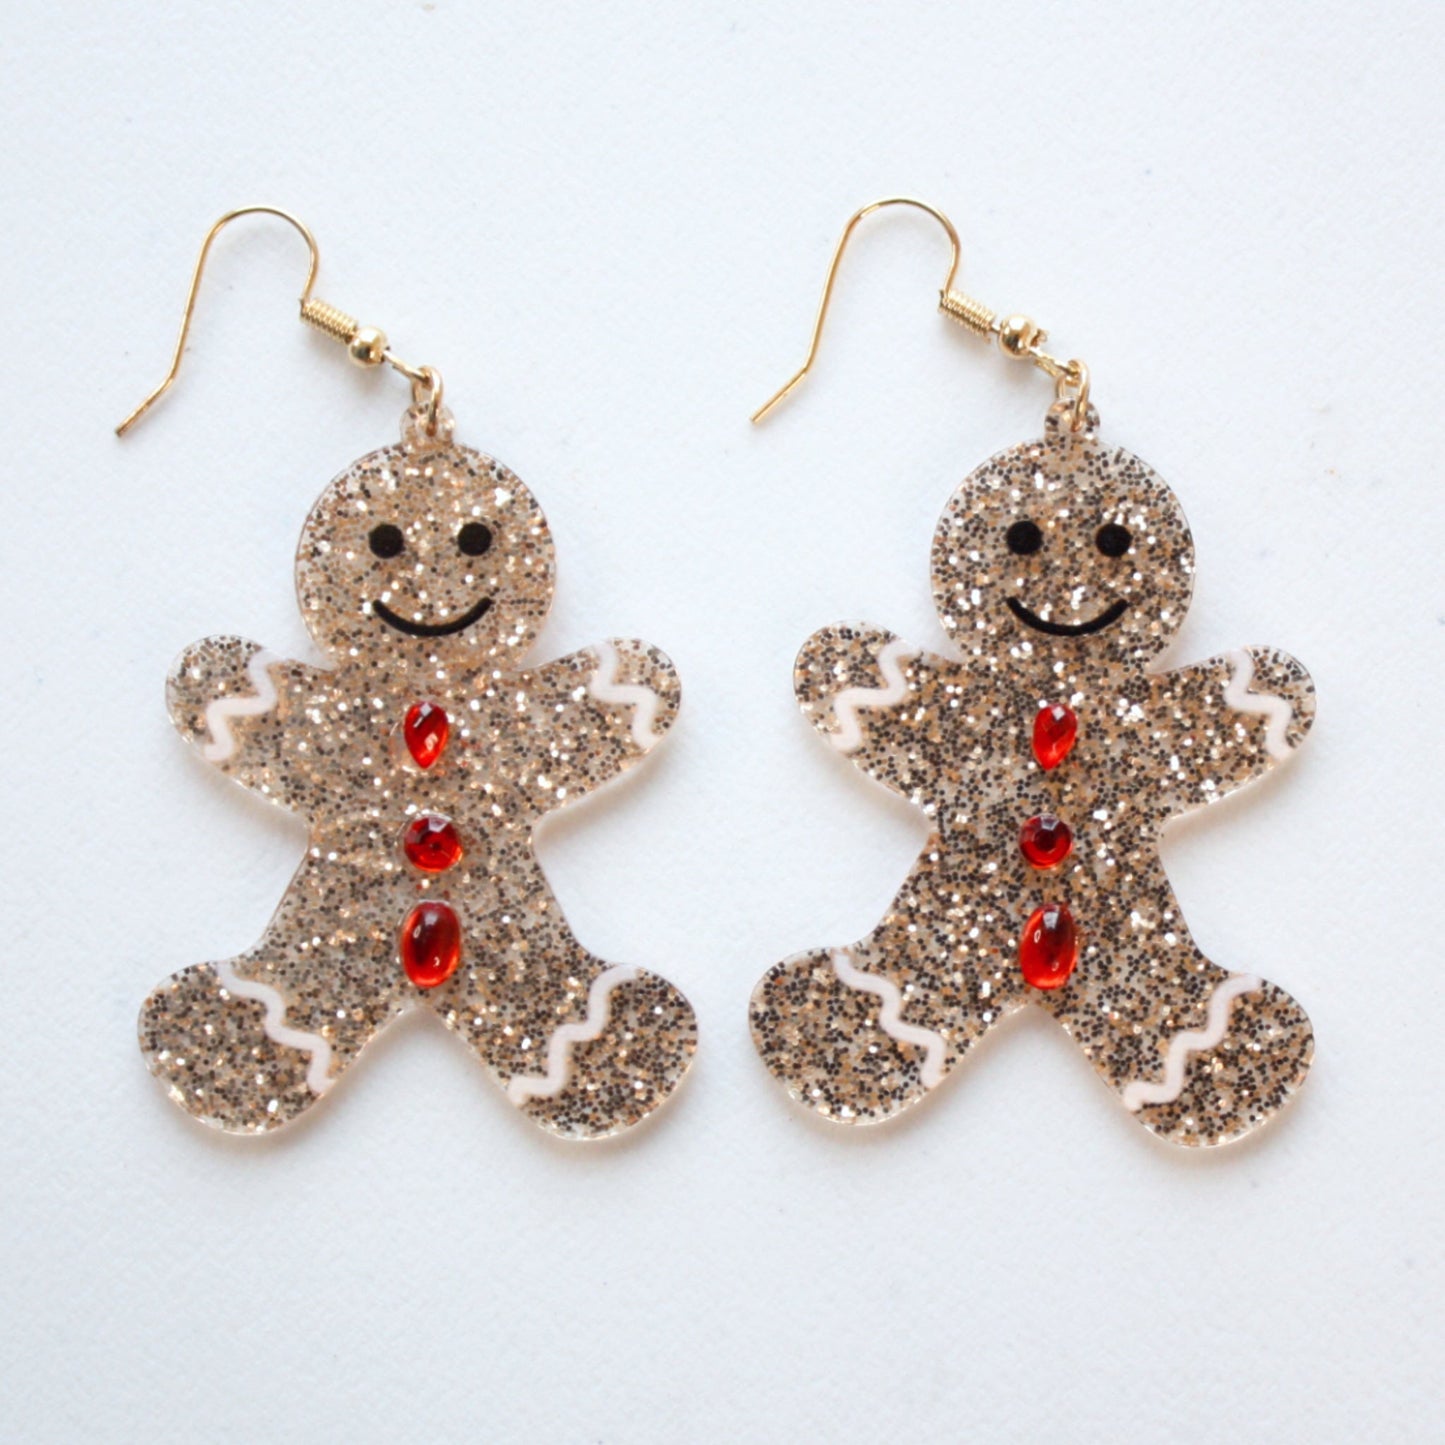 Sparkly Gingerbread Christmas Earrings - Made in the USA